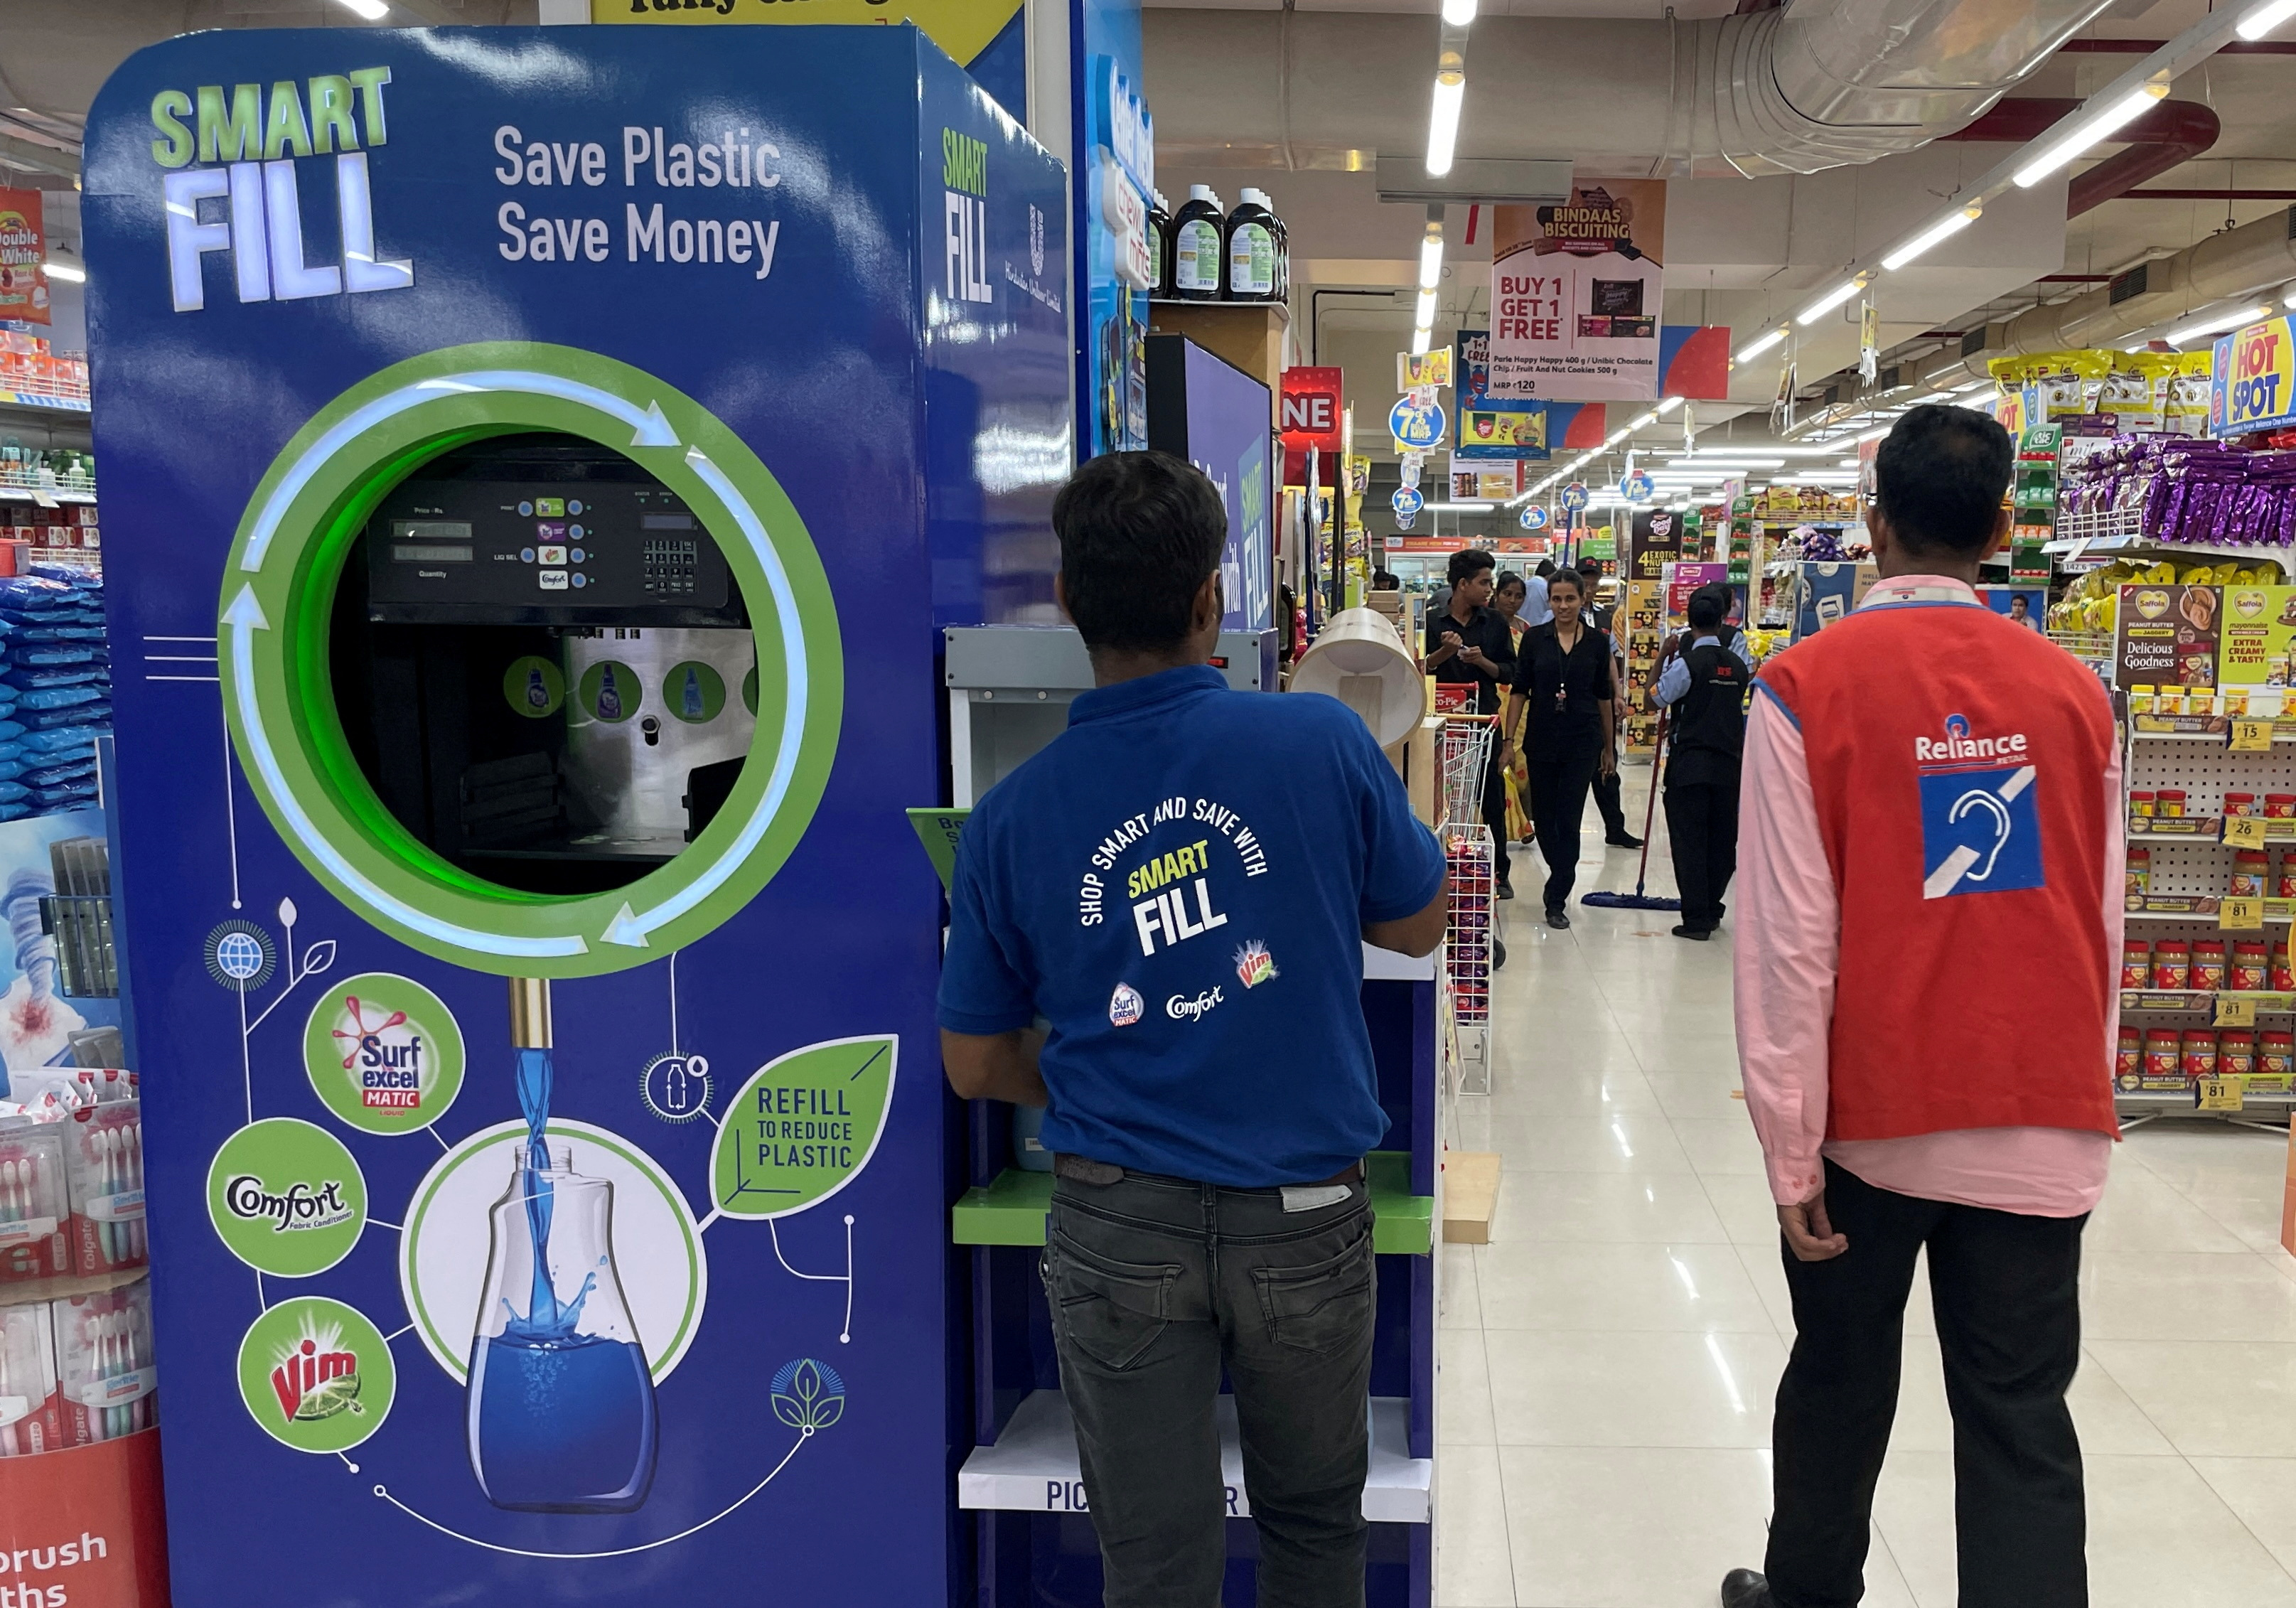 A Unilever employee removes a bottle from a 'Smart Fill' refilling machine inside a supermarket in Mumbai